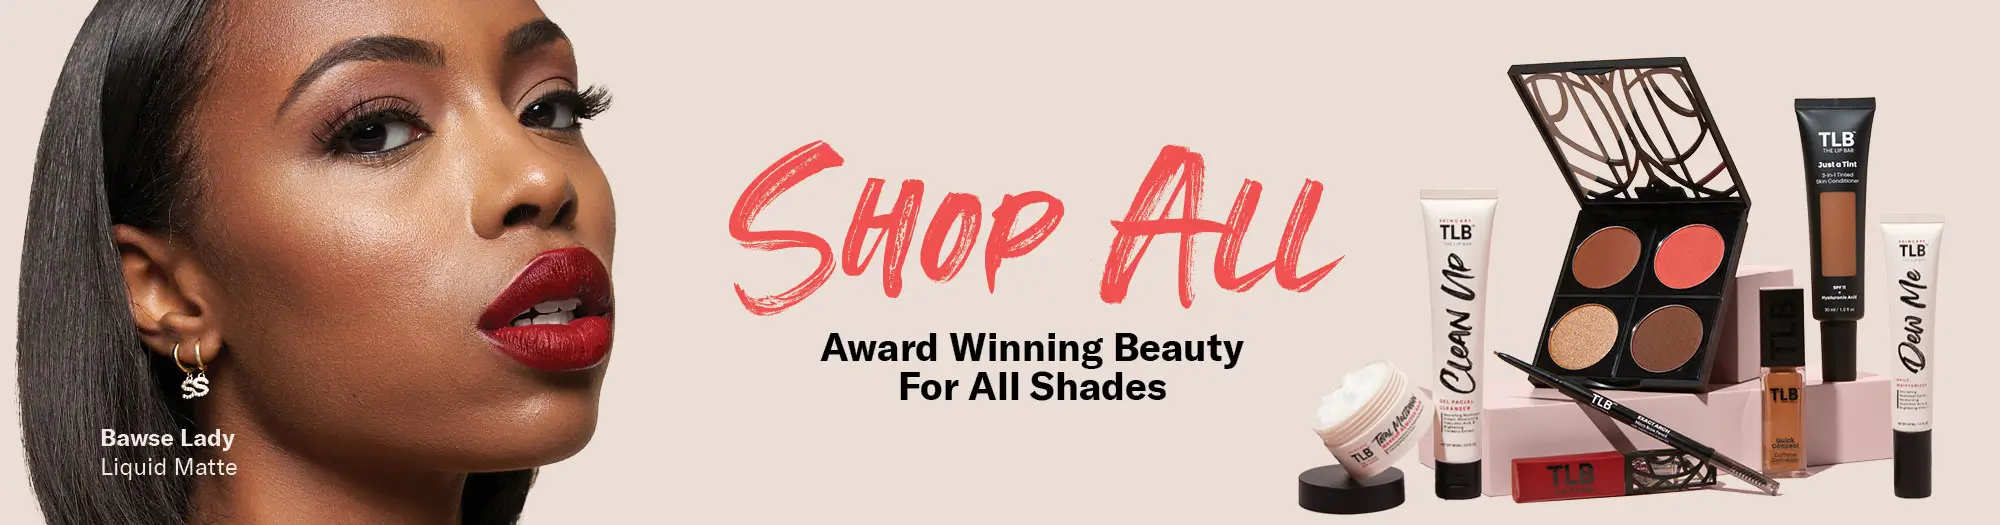 Shop - All products